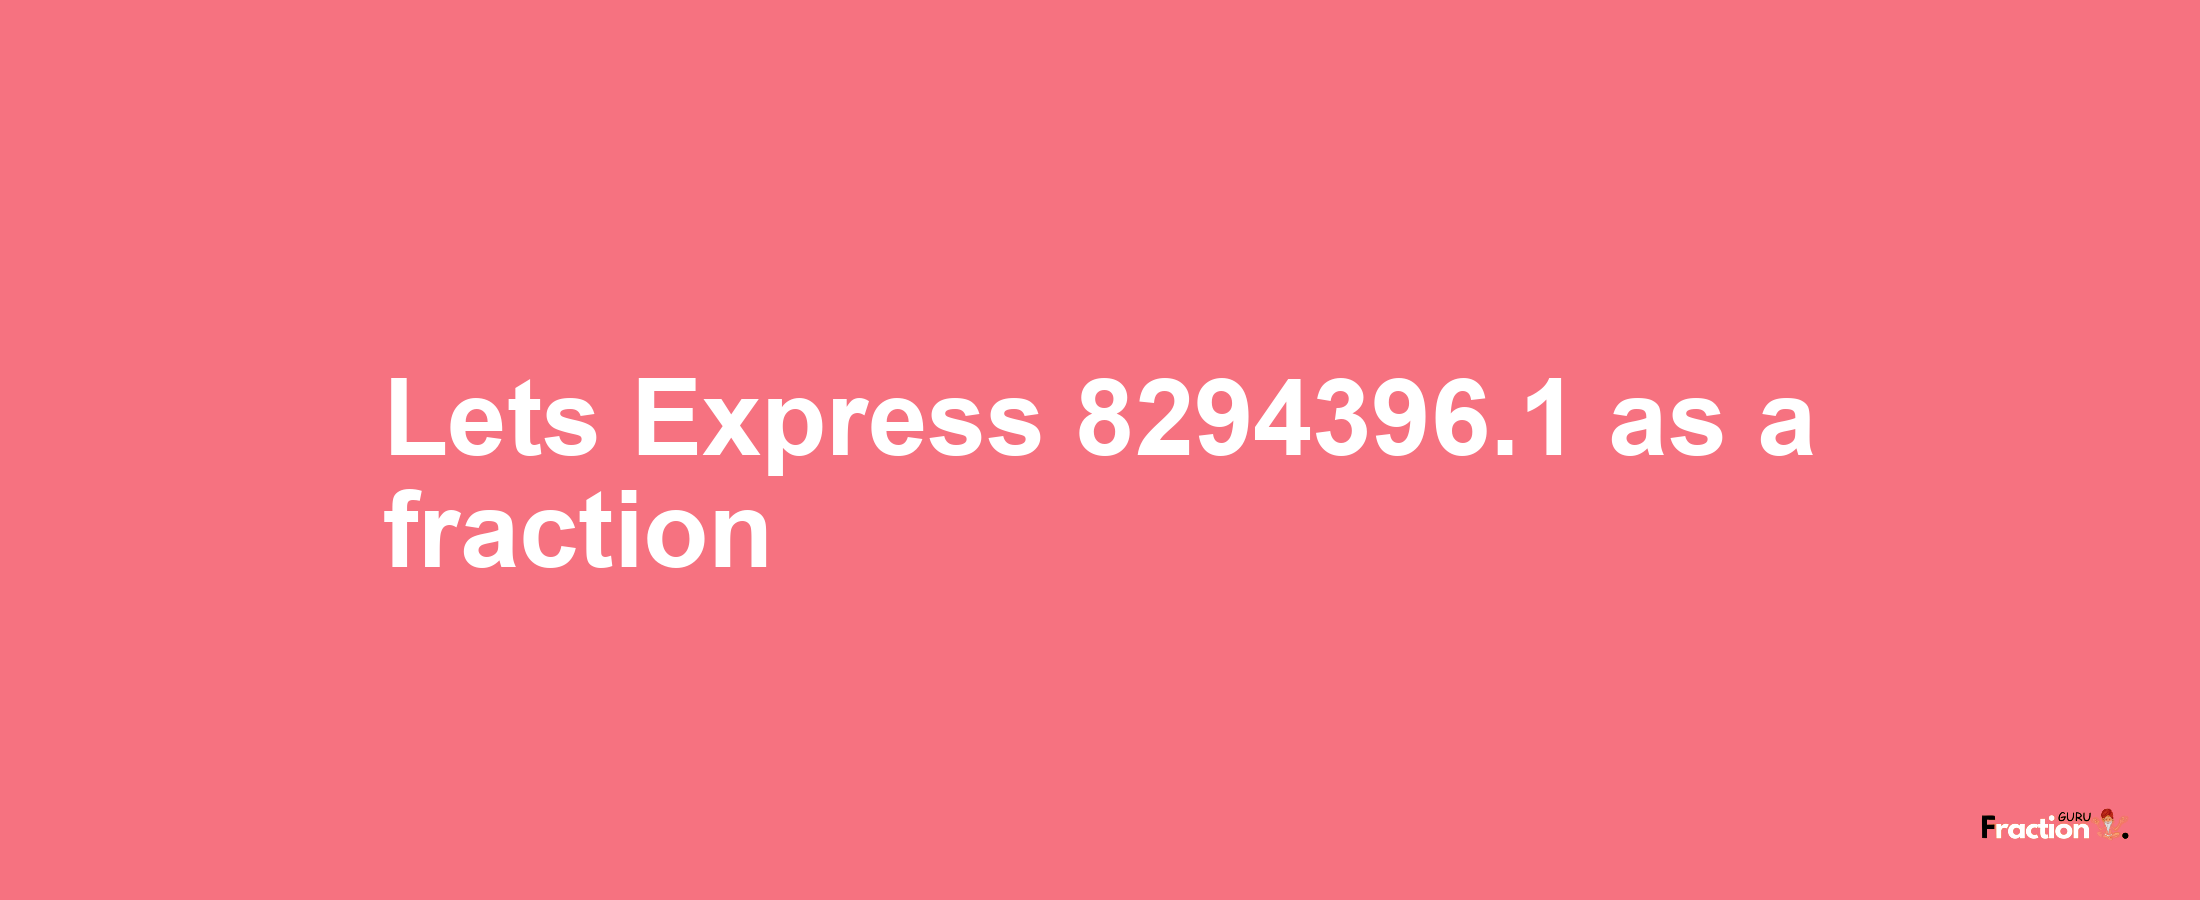 Lets Express 8294396.1 as afraction